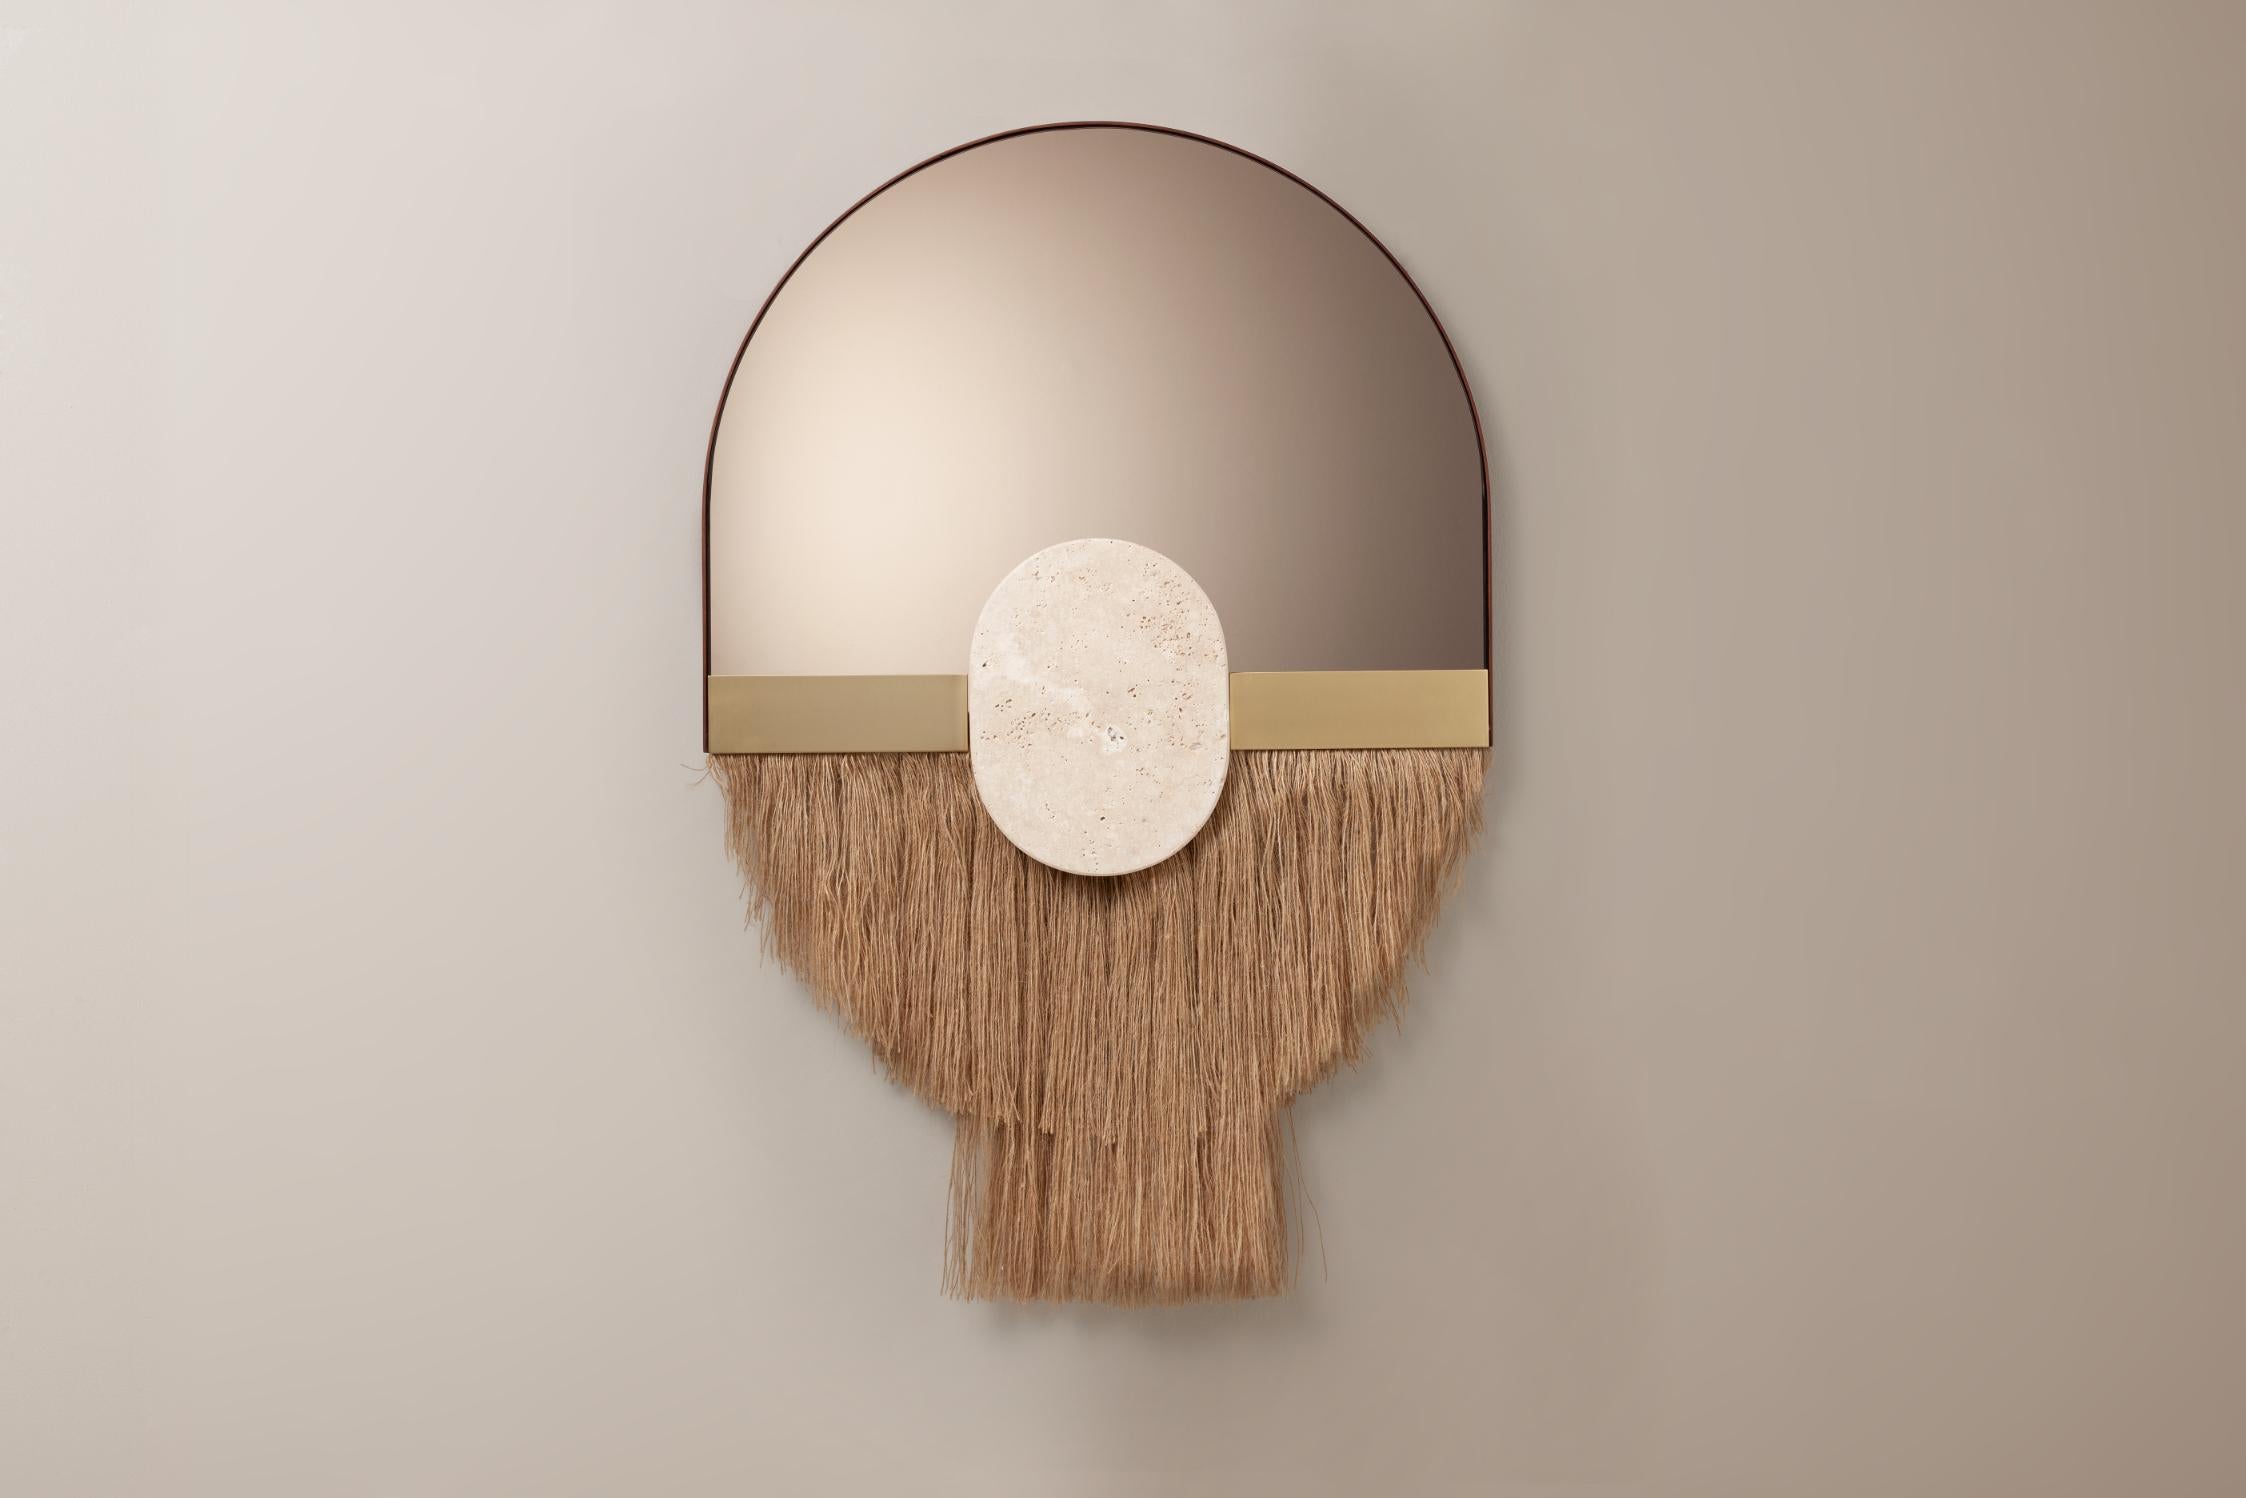 Soul Ecru Latte mirror by Dooq
Dimensions: ø 30 x H 40 cm
Materials: Glass, marble.

Created by the perfect combination of color, energy and shape, Souk mirrors reflect the influences of overwhelming and visually fascinating Souk markets in